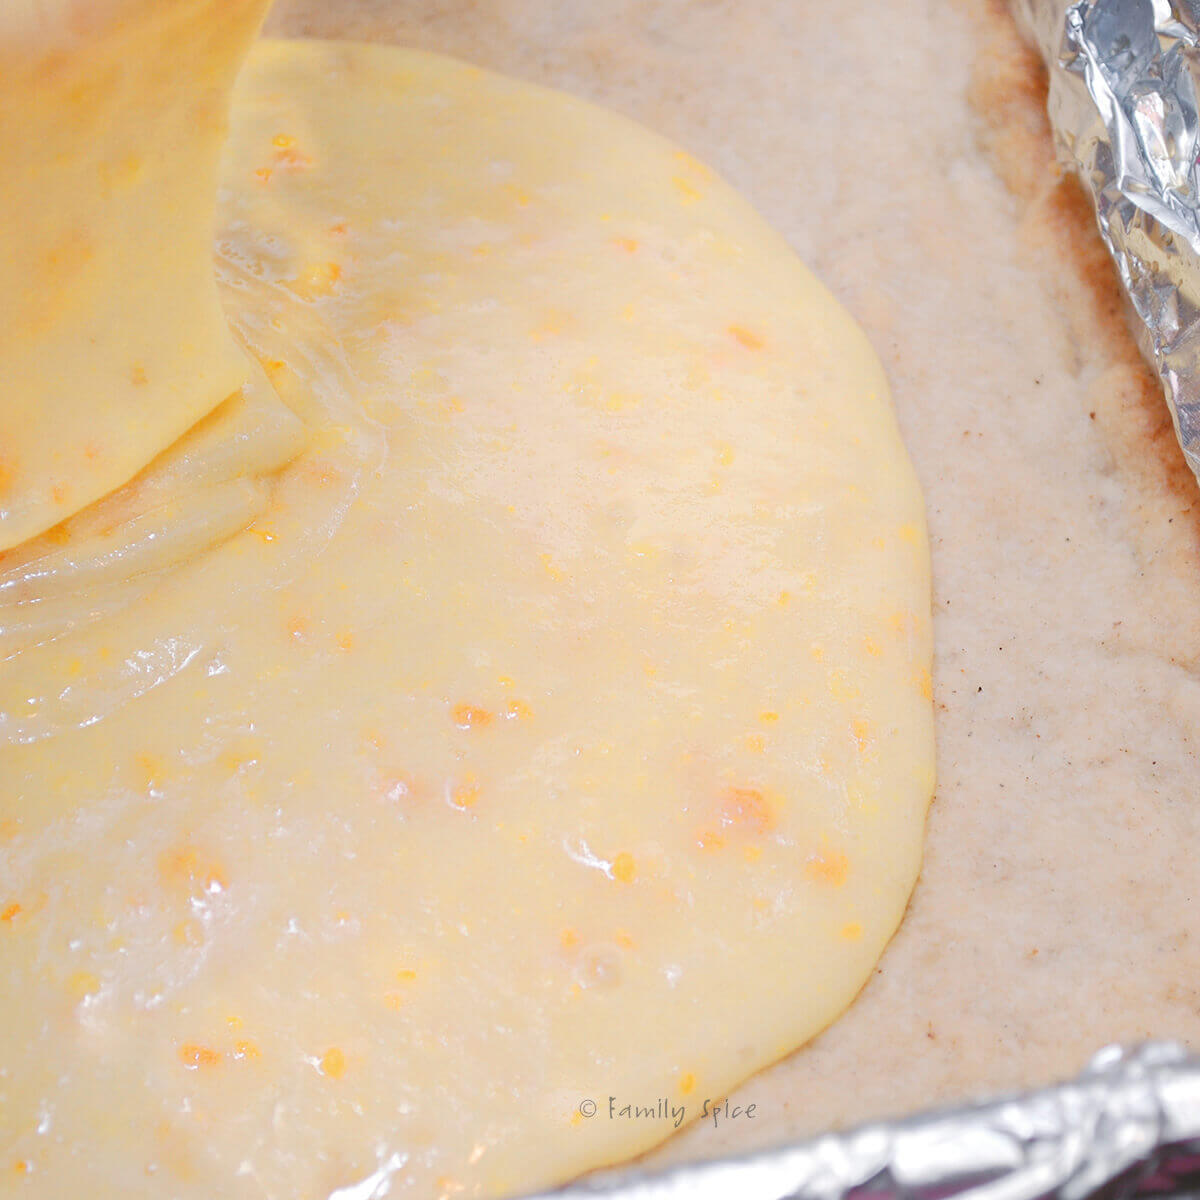 Pouring kumquat filling over shortbread crust in a foil lined baking pan